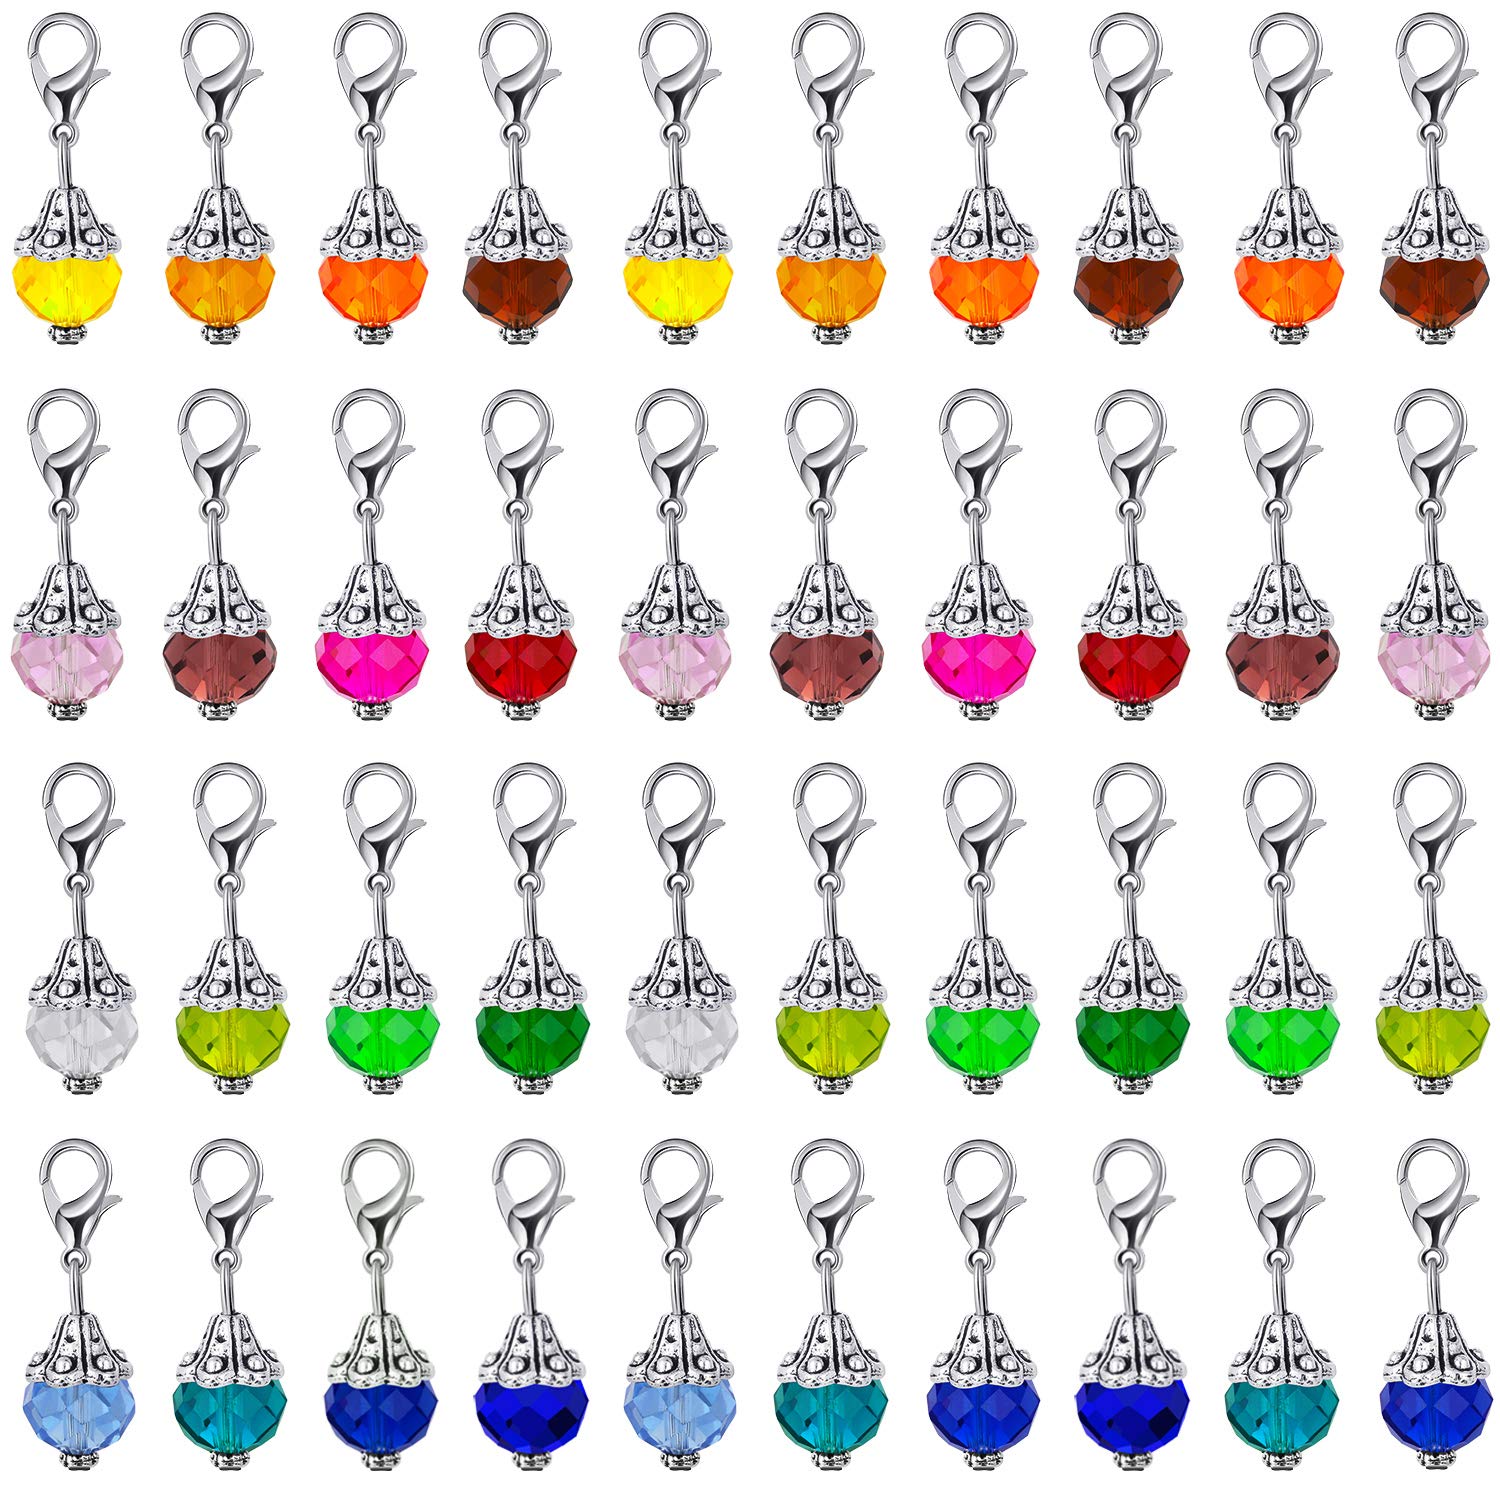 Hicarer 40 Pieces Crystal Dangle Charms Pendants Glass Drop Beads Handmade  Dangle Bead Charms with Silver Bead Cap for Jewelry Making Necklace Earring  Accessory Assorted Colors